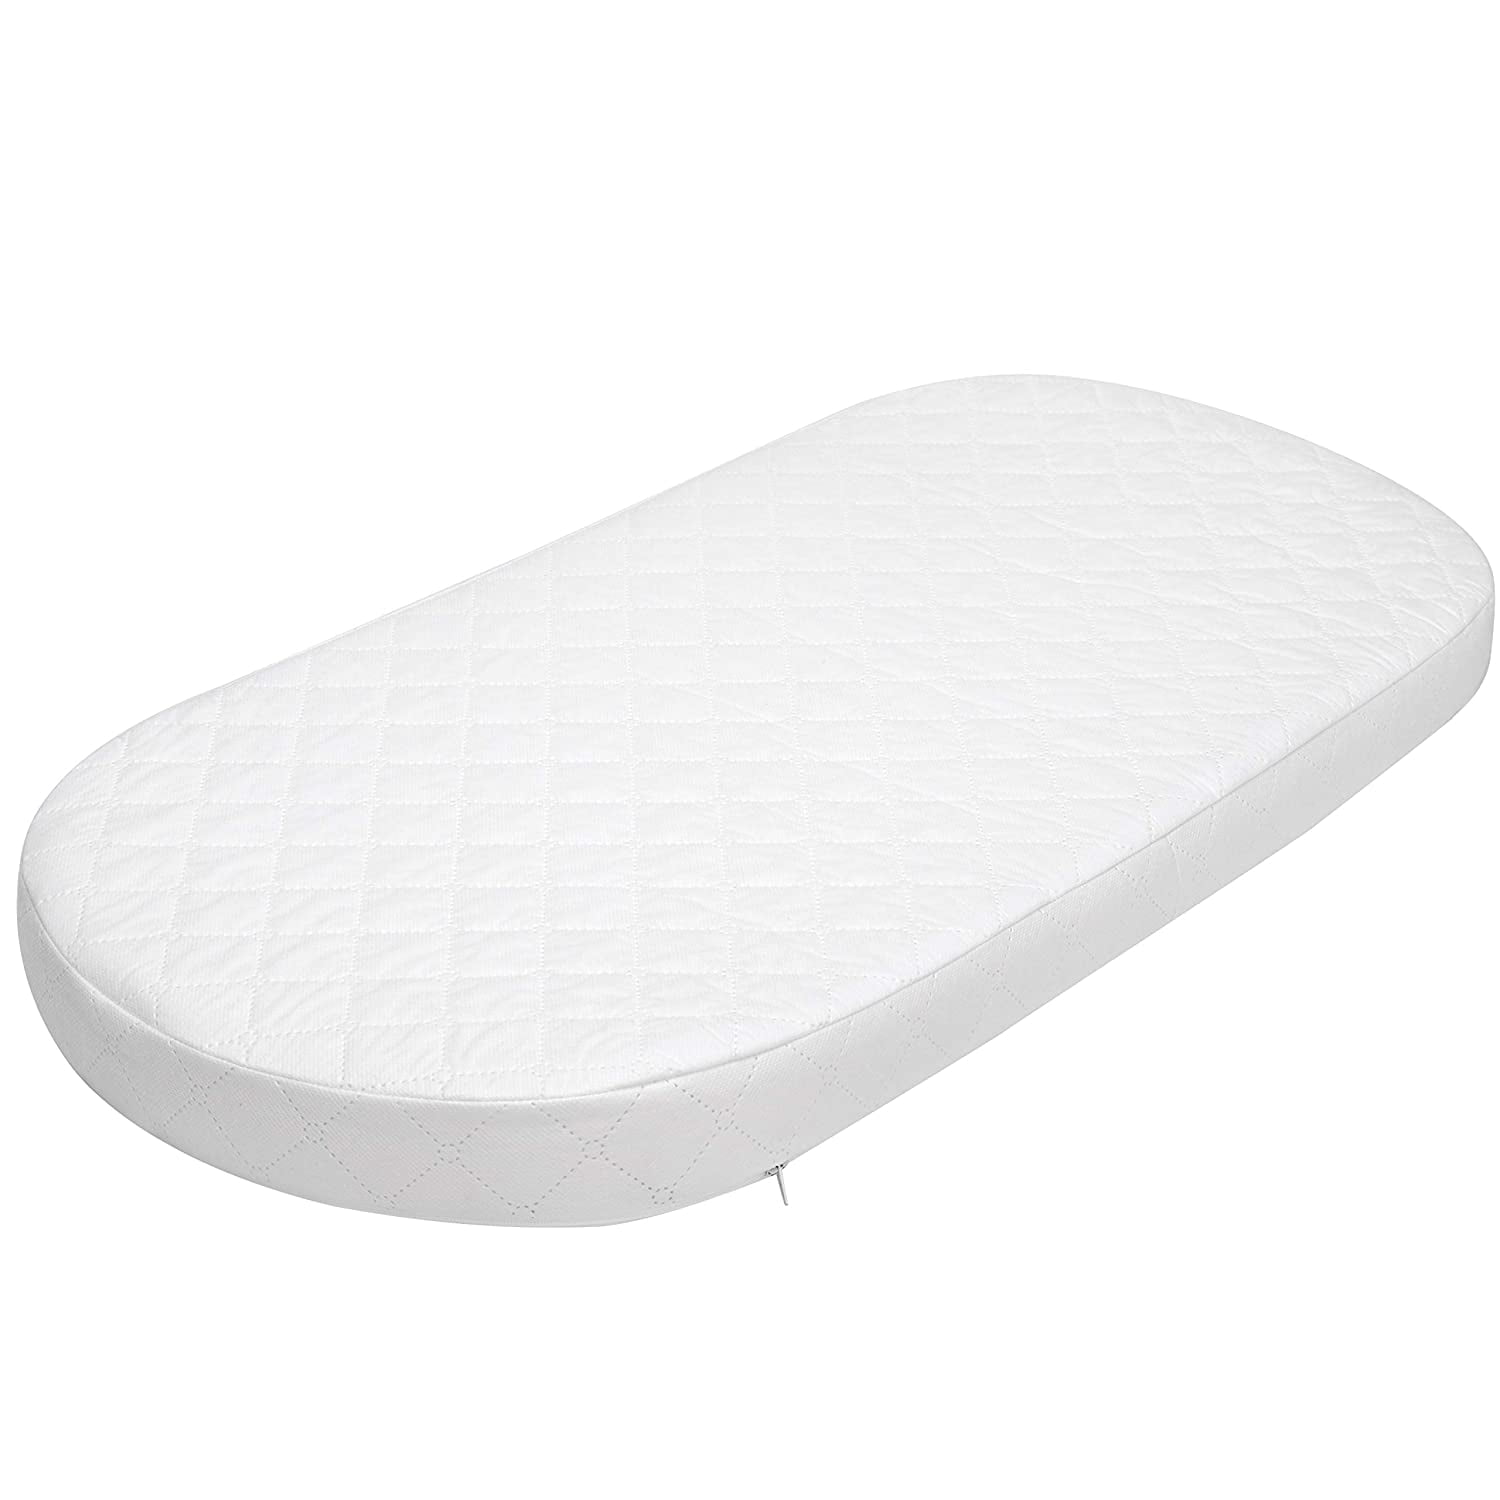 76 X 34 X 3.5 cm Moses Basket Foam Mattress Bassinet Baby PRAM Oval Fully Breathable Quilted Size